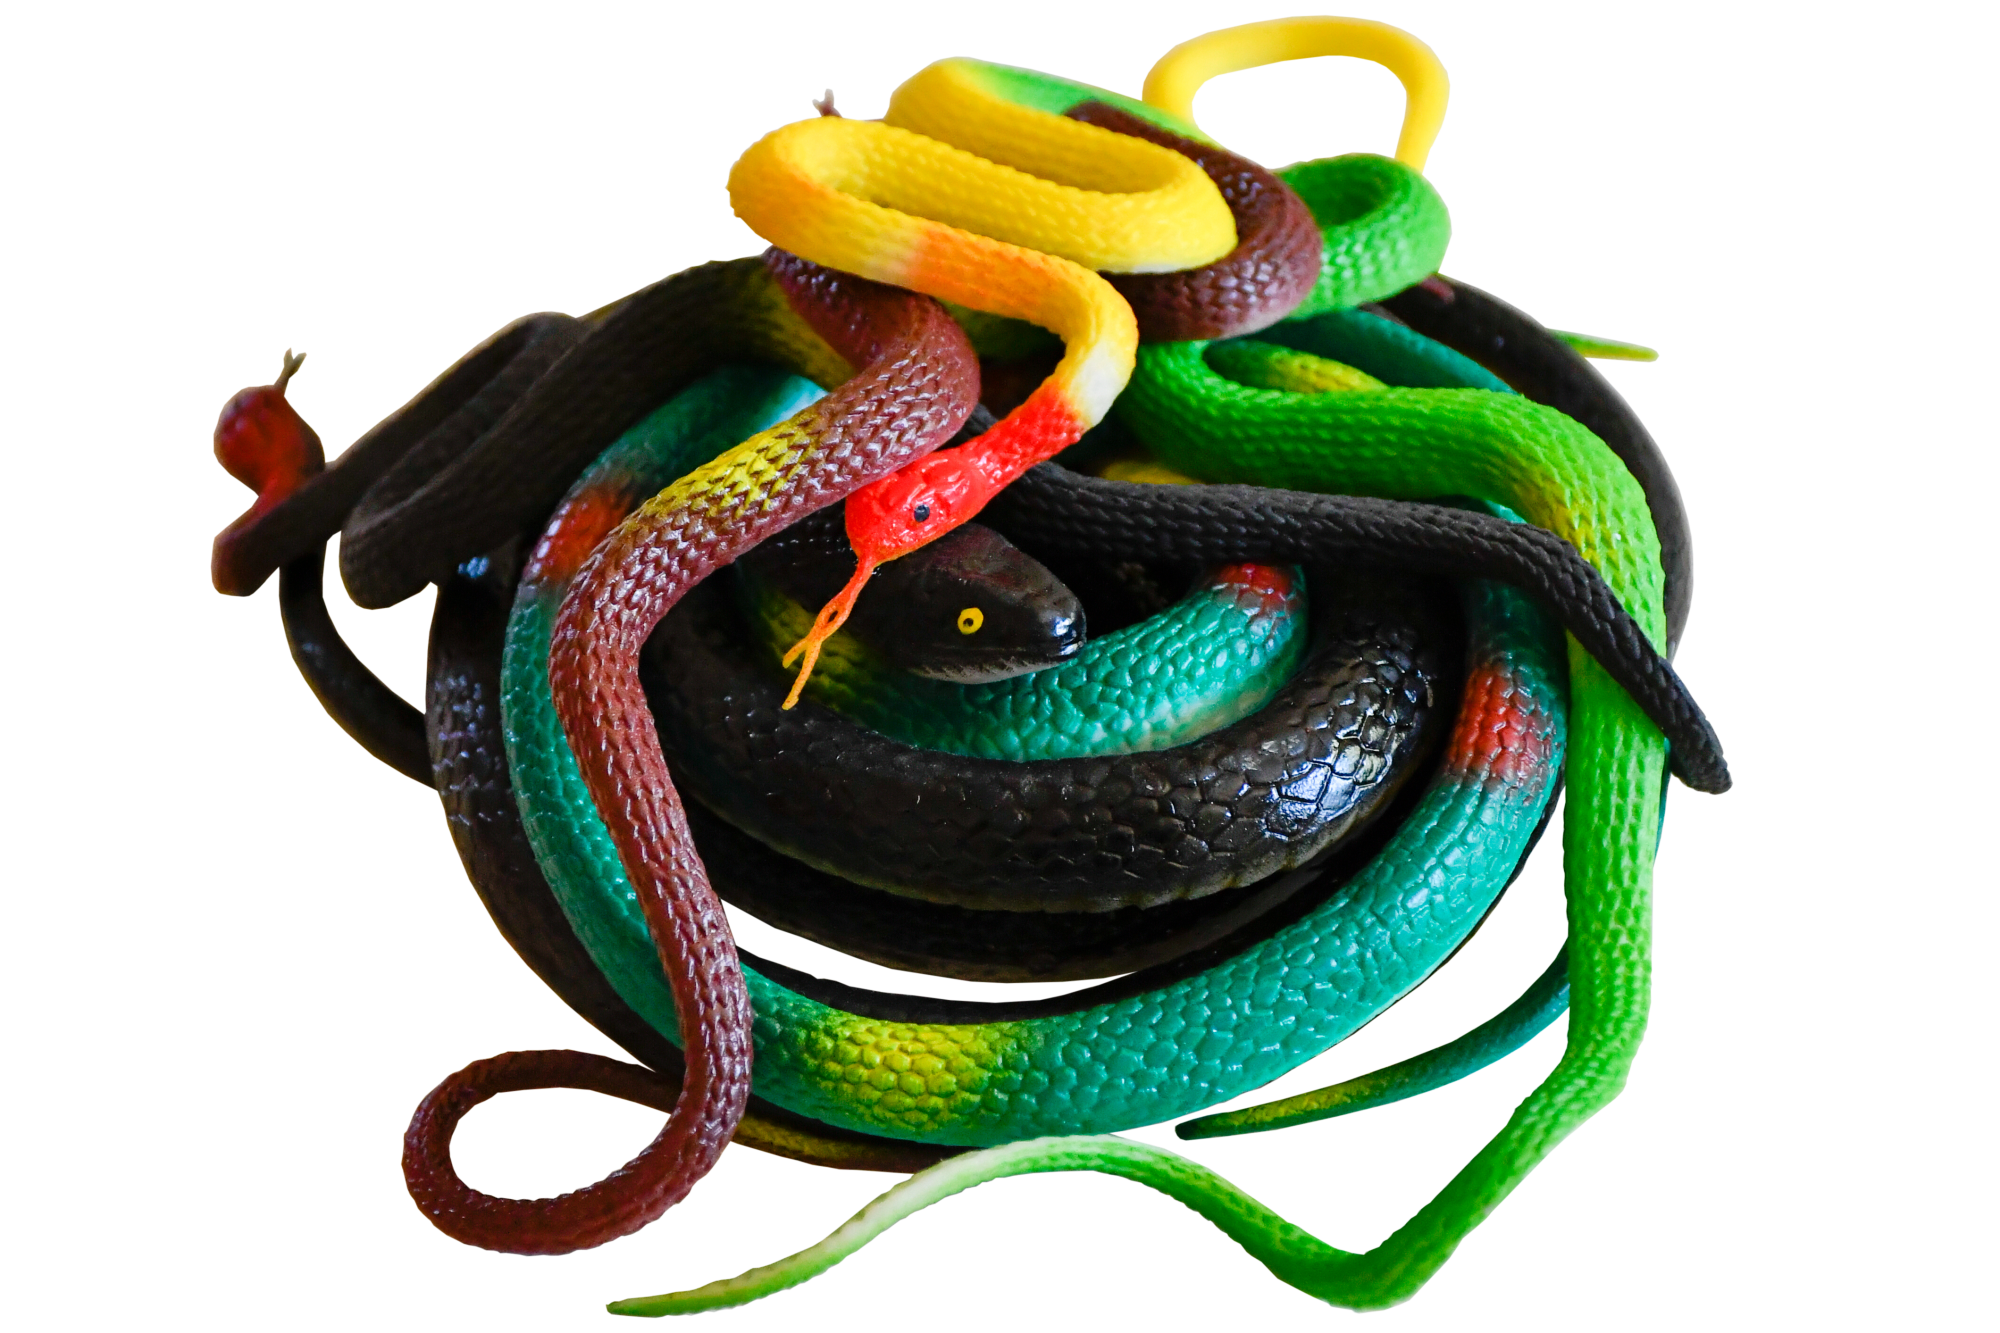 A pile of rubber snakes, topped with a bright yellow one with a red head